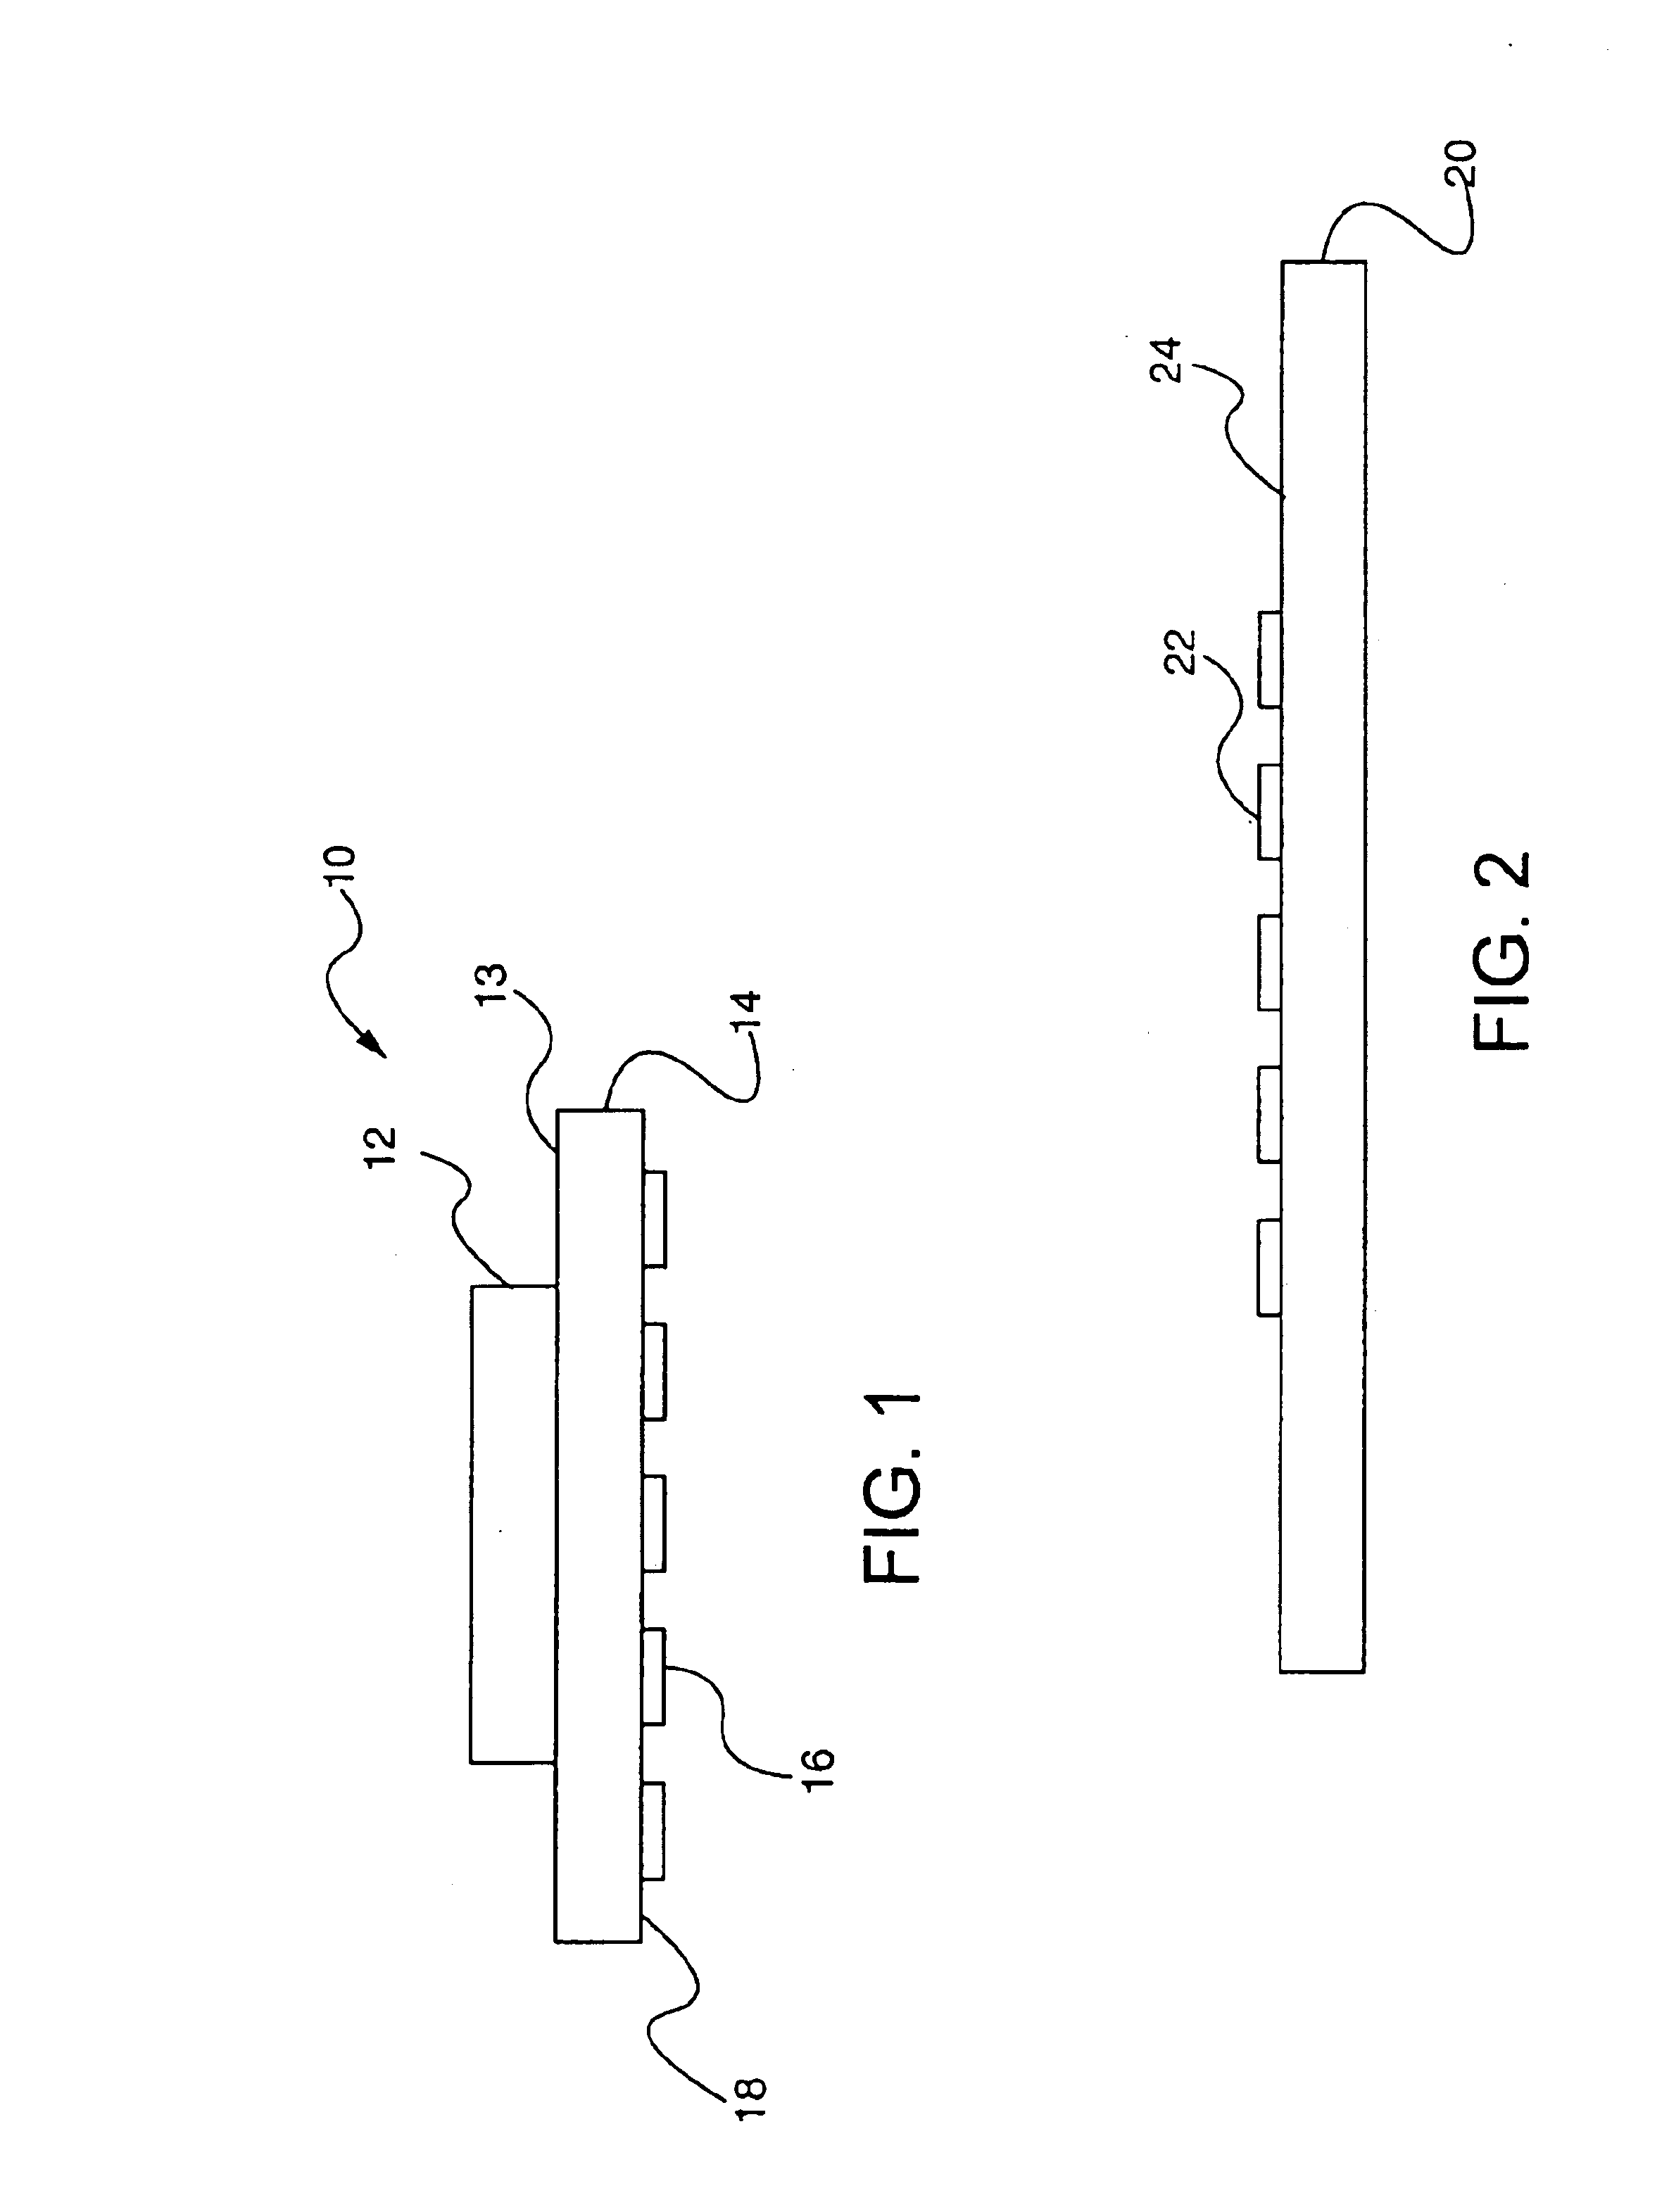 Partially captured oriented interconnections for BGA packages and a method of forming the interconnections